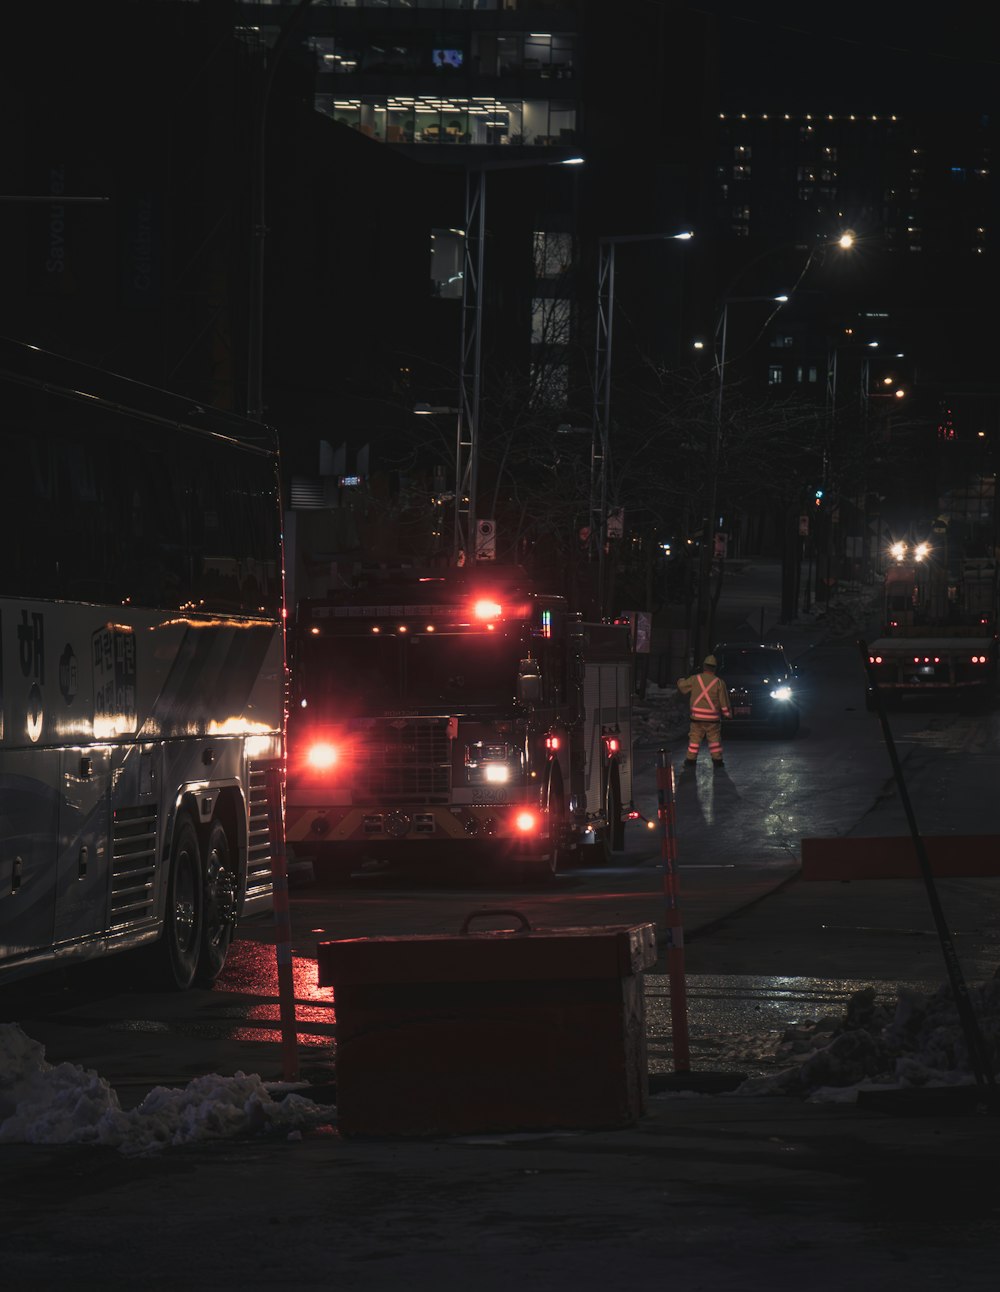 a night scene of a city street with a large truck